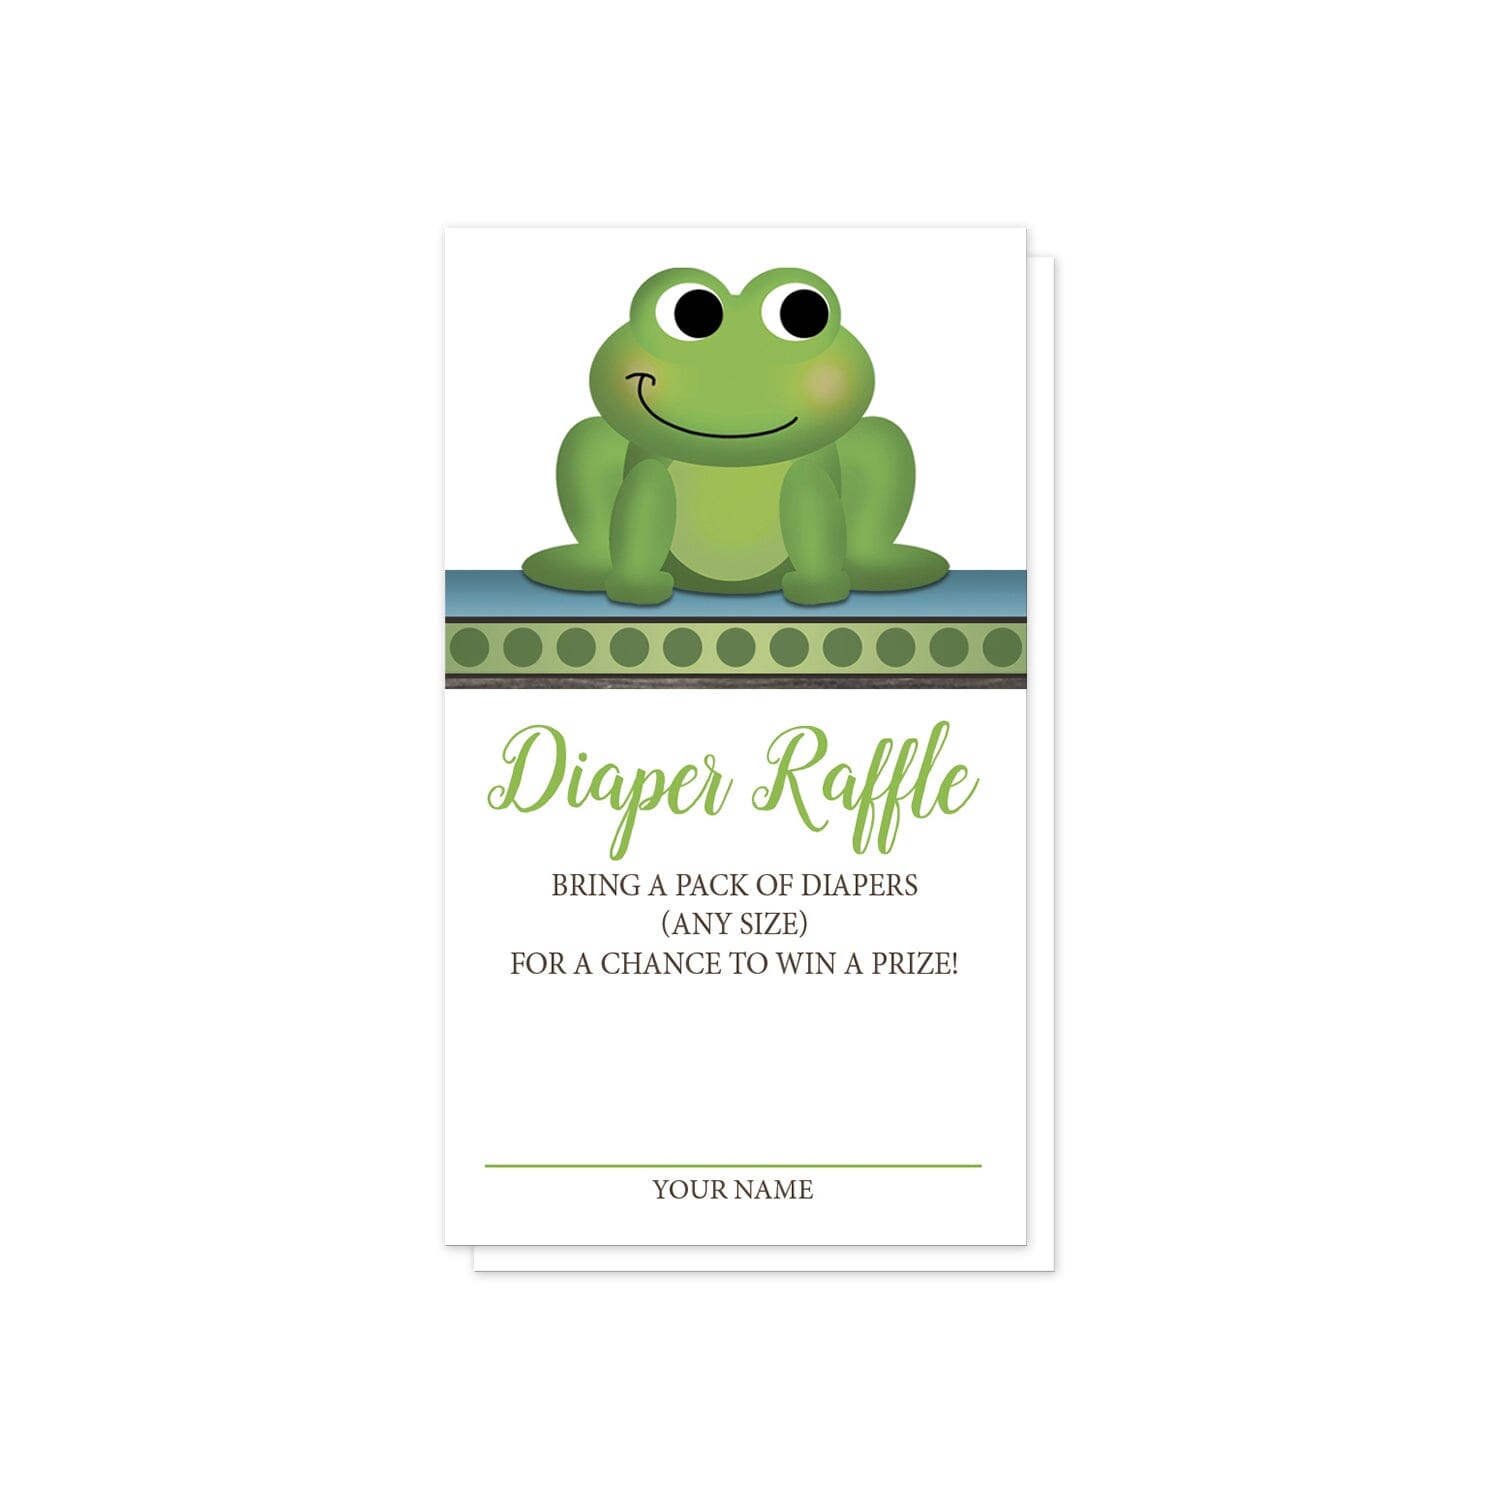 Cute Frog Green Rustic Brown Diaper Raffle Cards at Artistically Invited. Cute frog green rustic brown diaper raffle cards with a happy and adorable green frog on a blue, green polka dot, and thin brown wood stripe at the top of the cards. Your diaper raffle details are printed in green and brown on white below the cute frog.